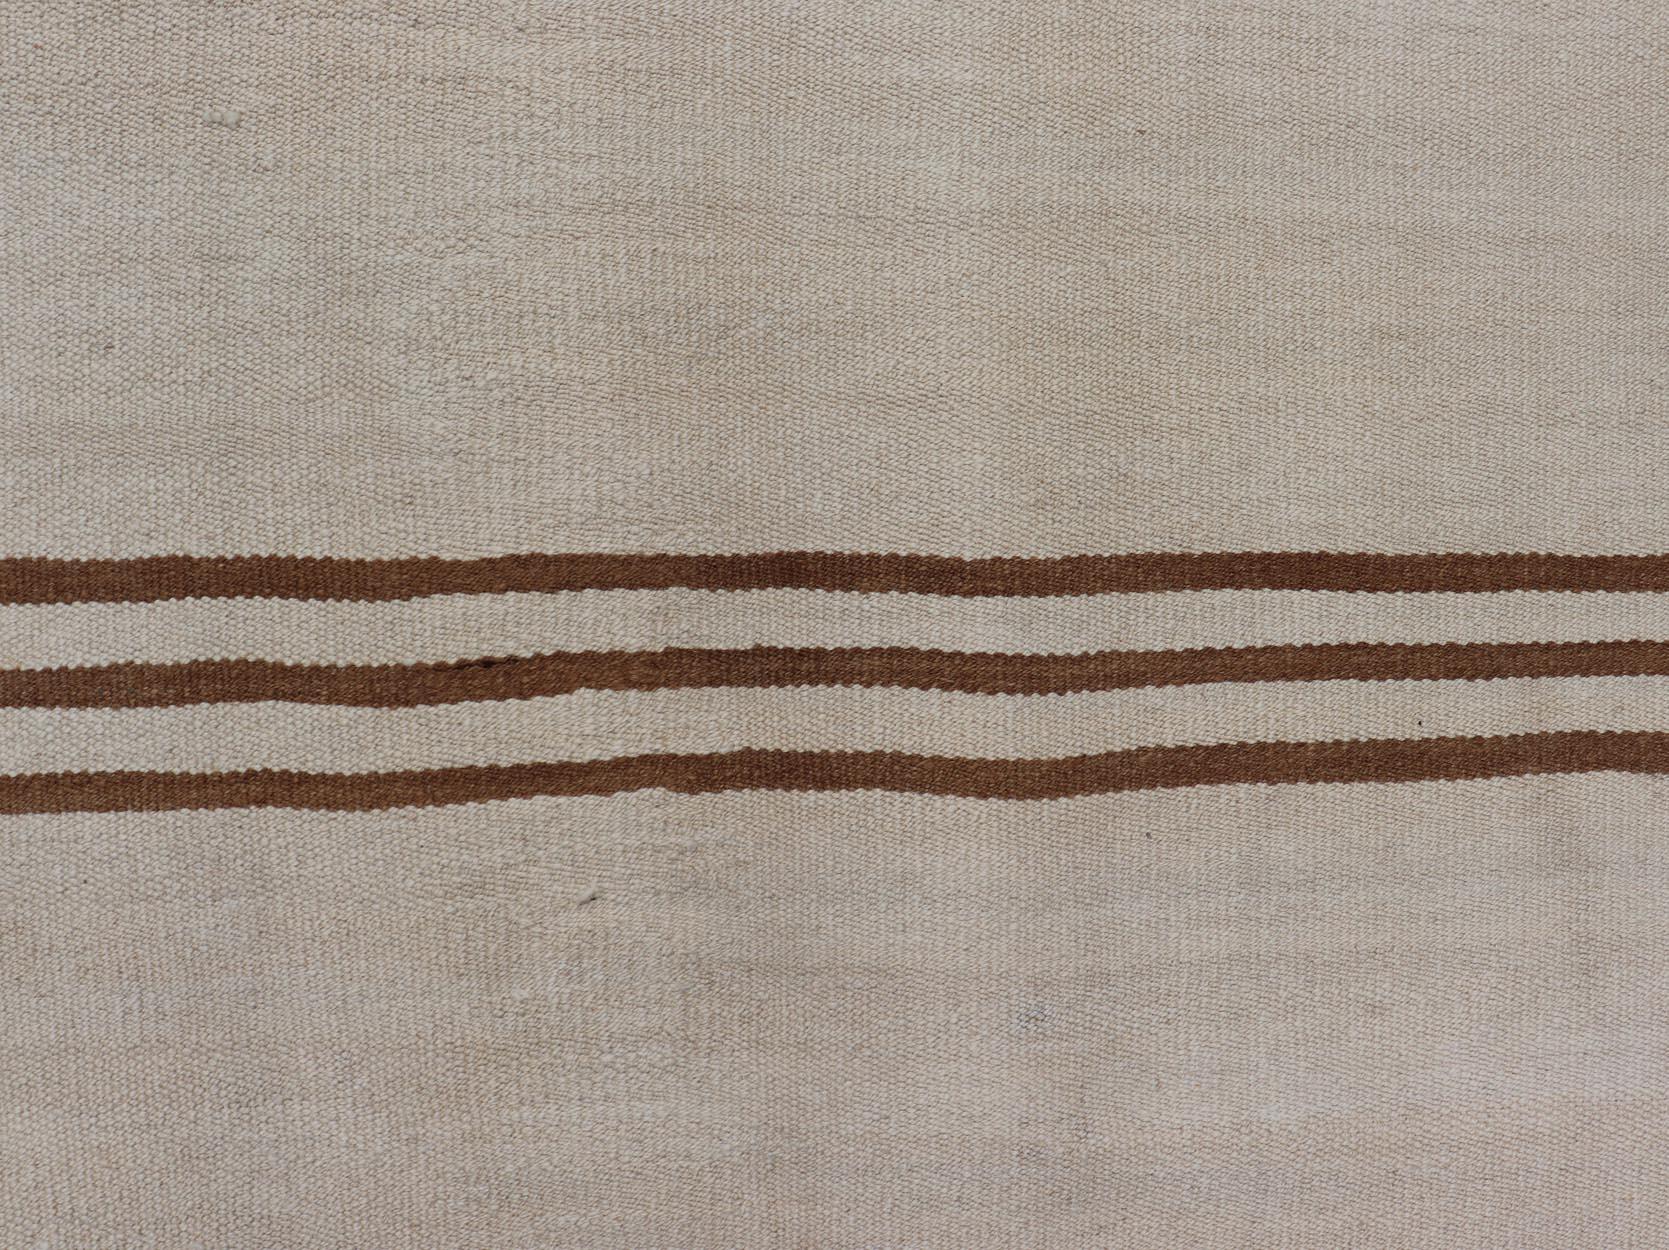 Flat-Weave Kilim Vintage Rug Turkey with Horizontal Stripes in Ivory & Brown In Good Condition For Sale In Atlanta, GA